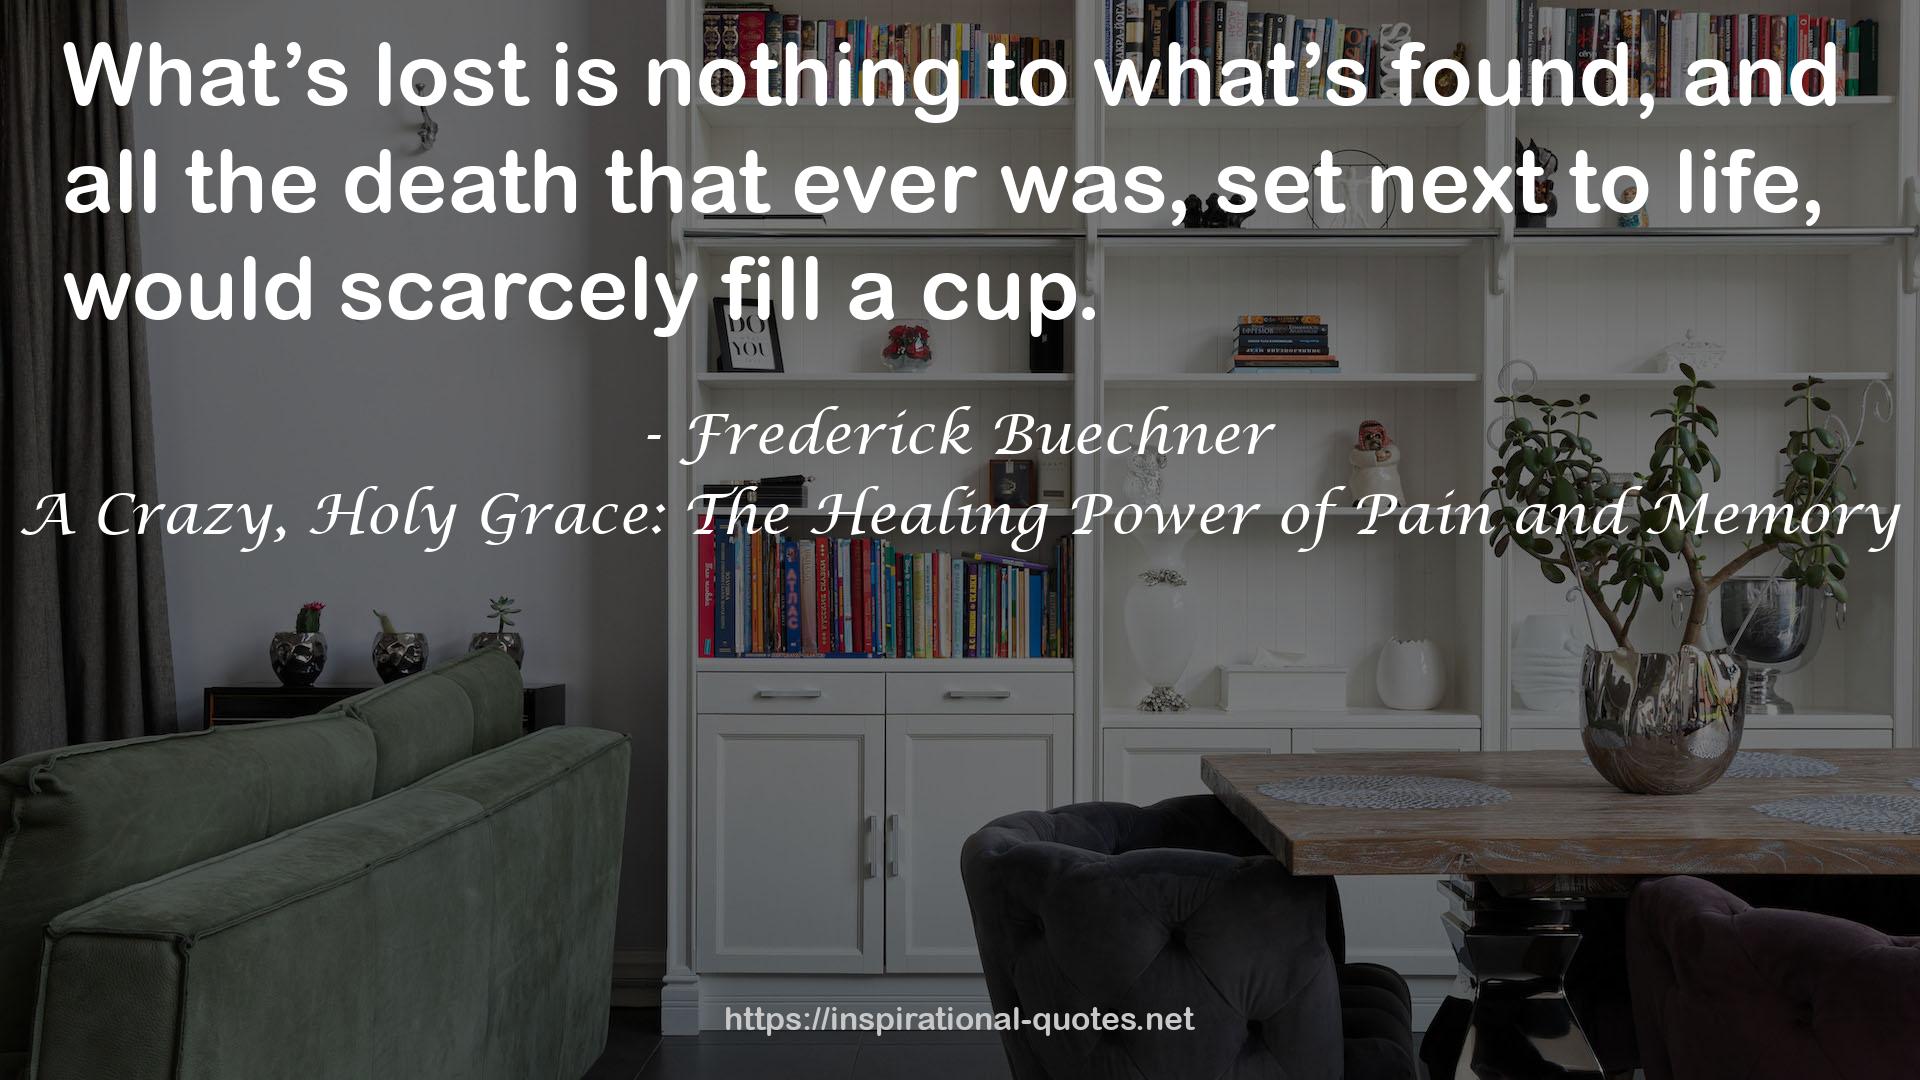 A Crazy, Holy Grace: The Healing Power of Pain and Memory QUOTES